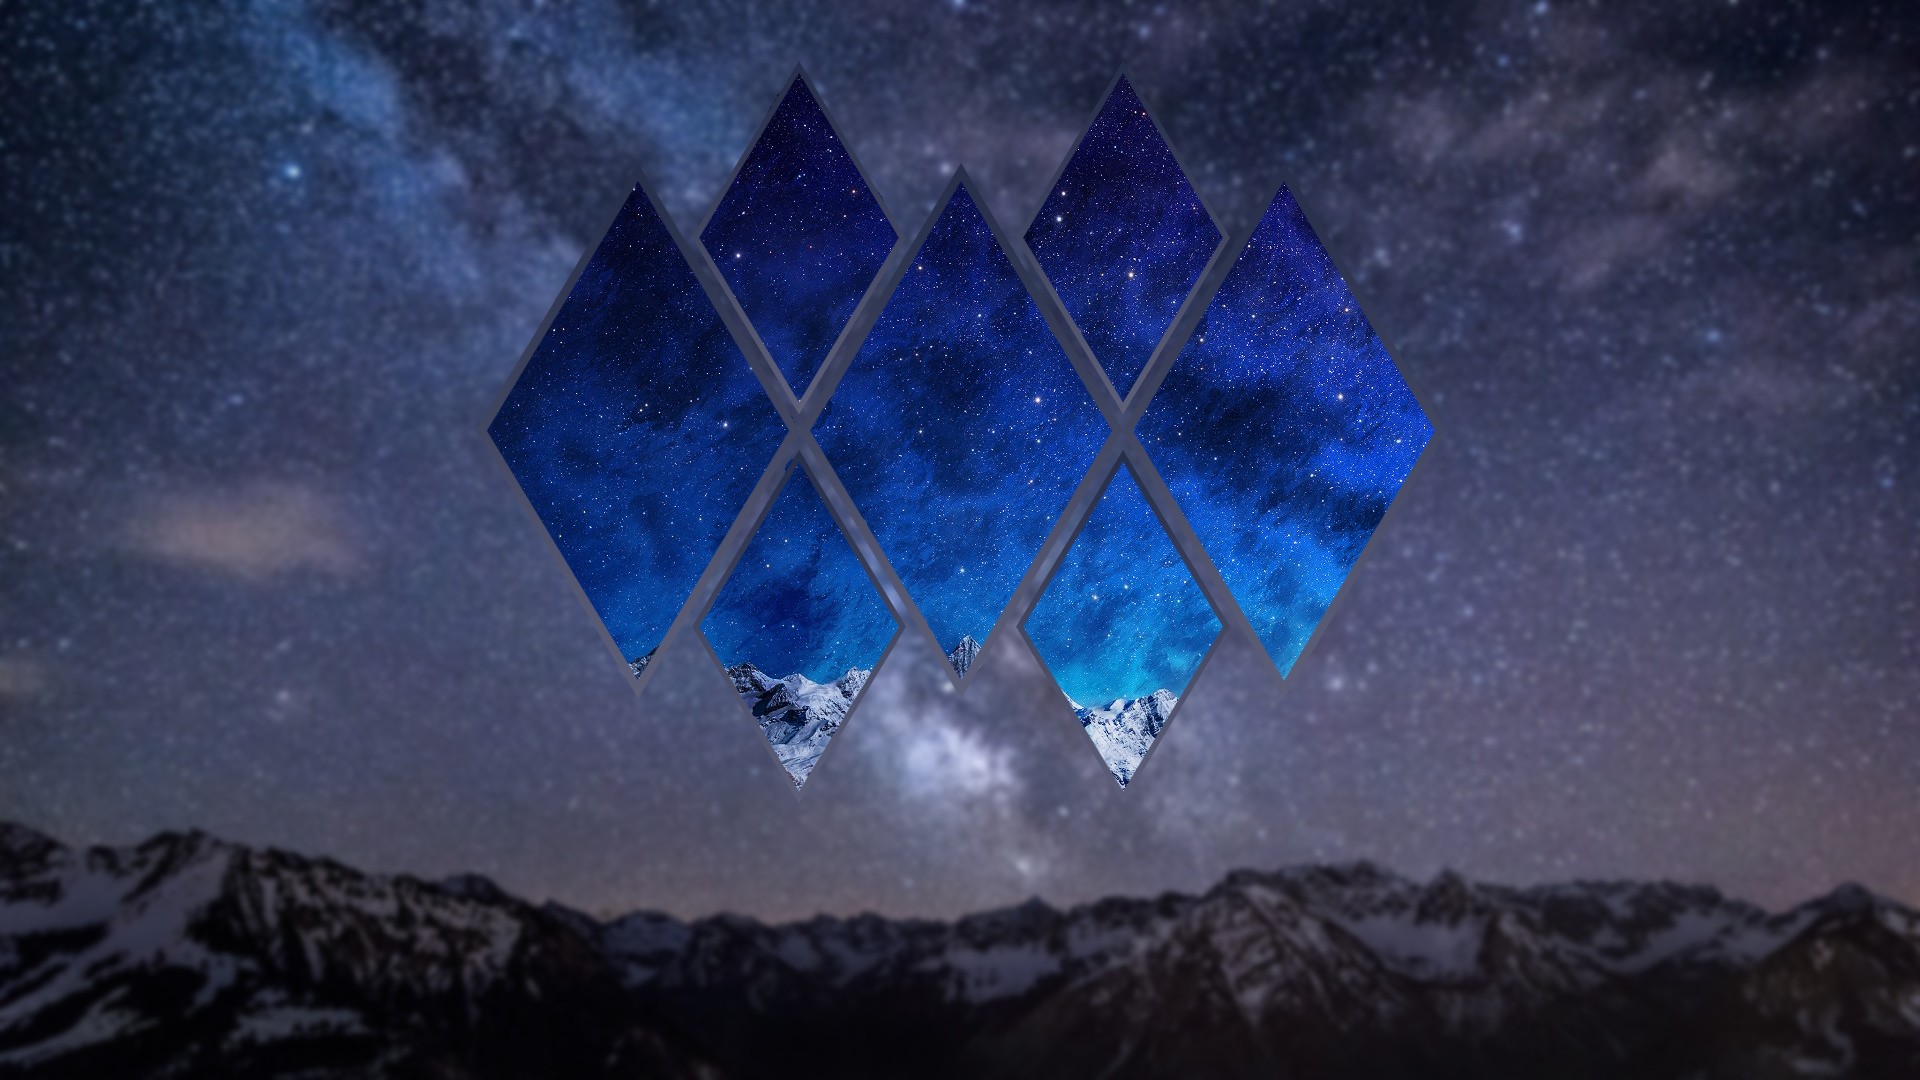 General 1920x1080 stars space mountains landscape night polyscape